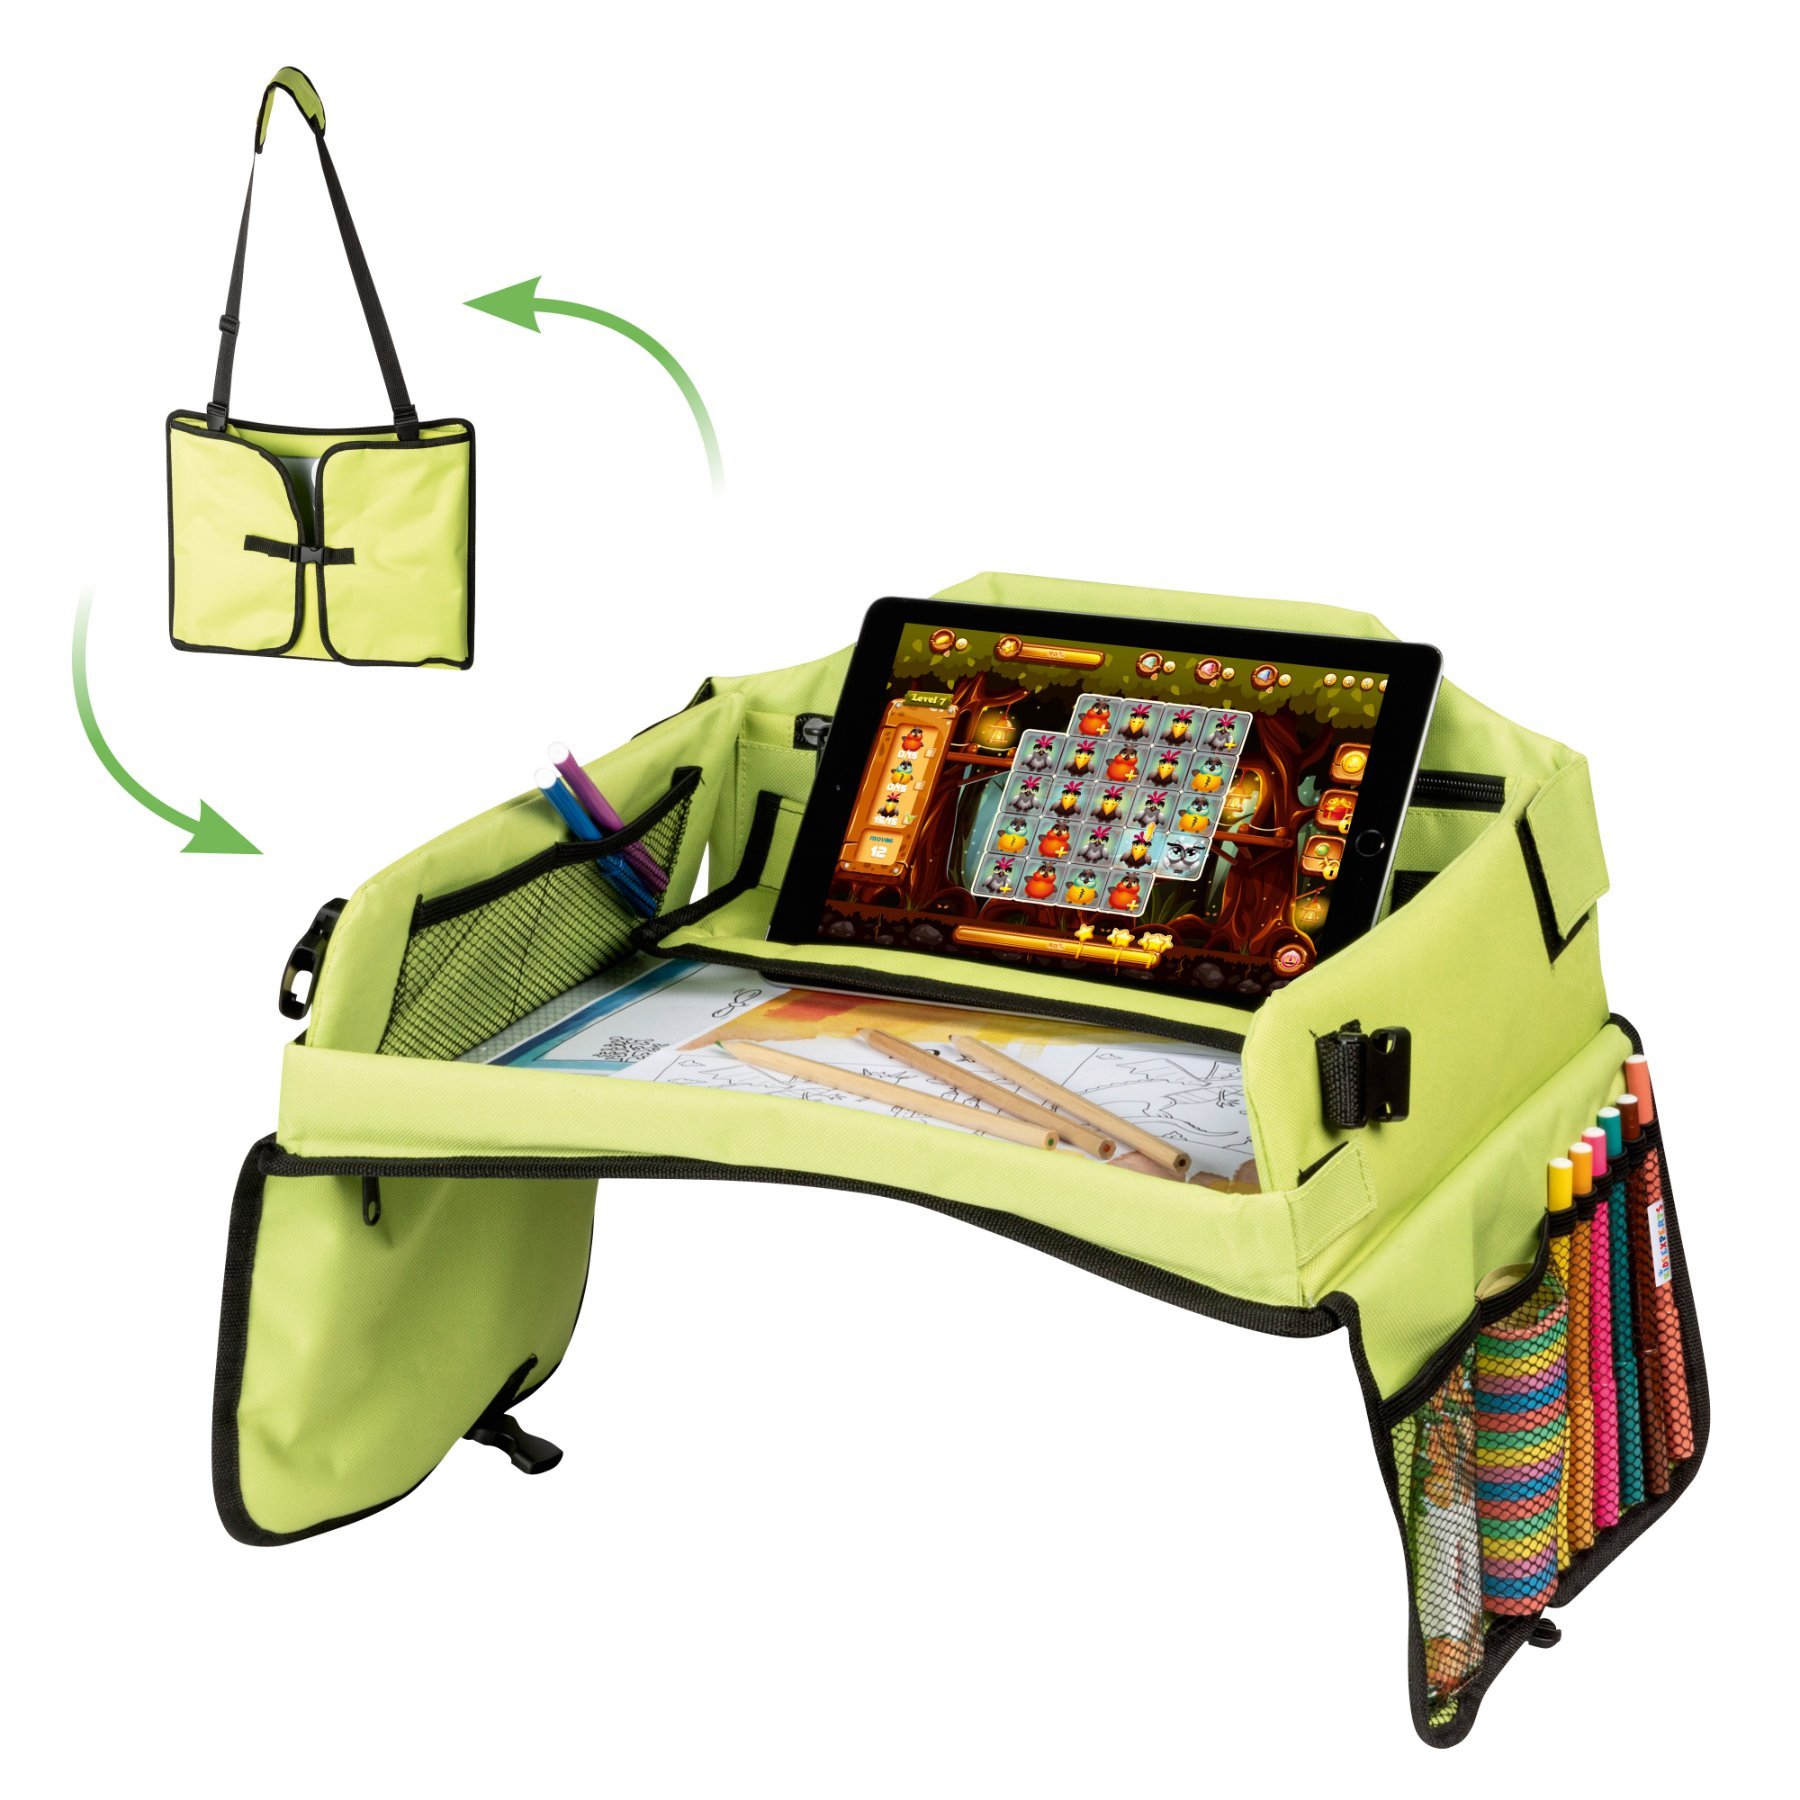 Children's travel play table for the car with tablet holder green